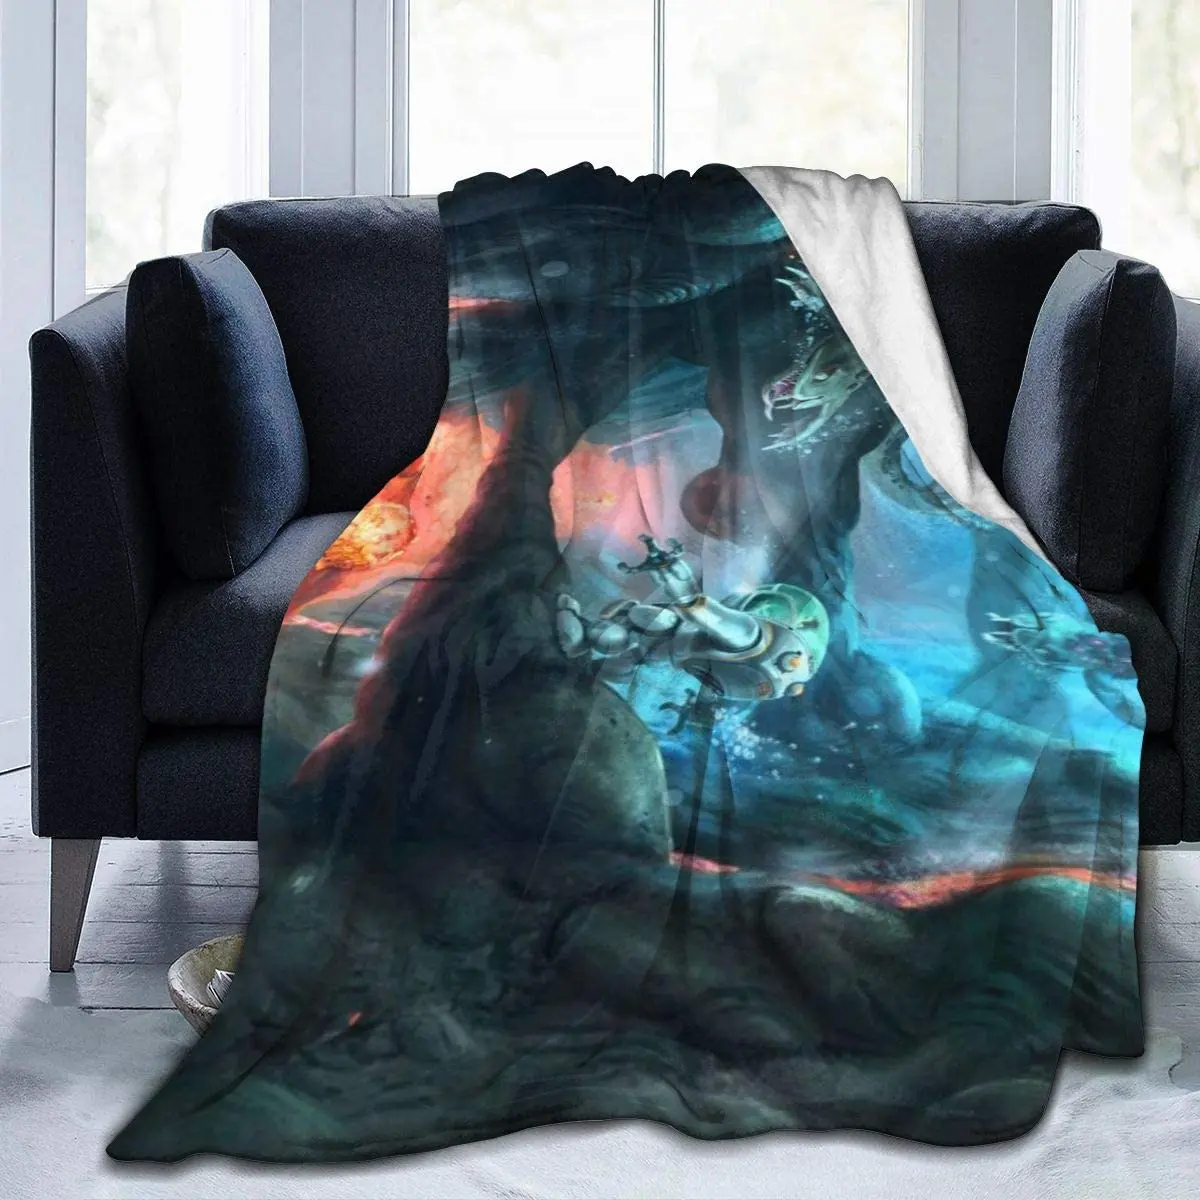 

Game Subnautica Blanket Oversized Warm Adult Super Soft Blanket with Soft Anti-Pilling Flannel for Adults & Kids 3D Print 80x60